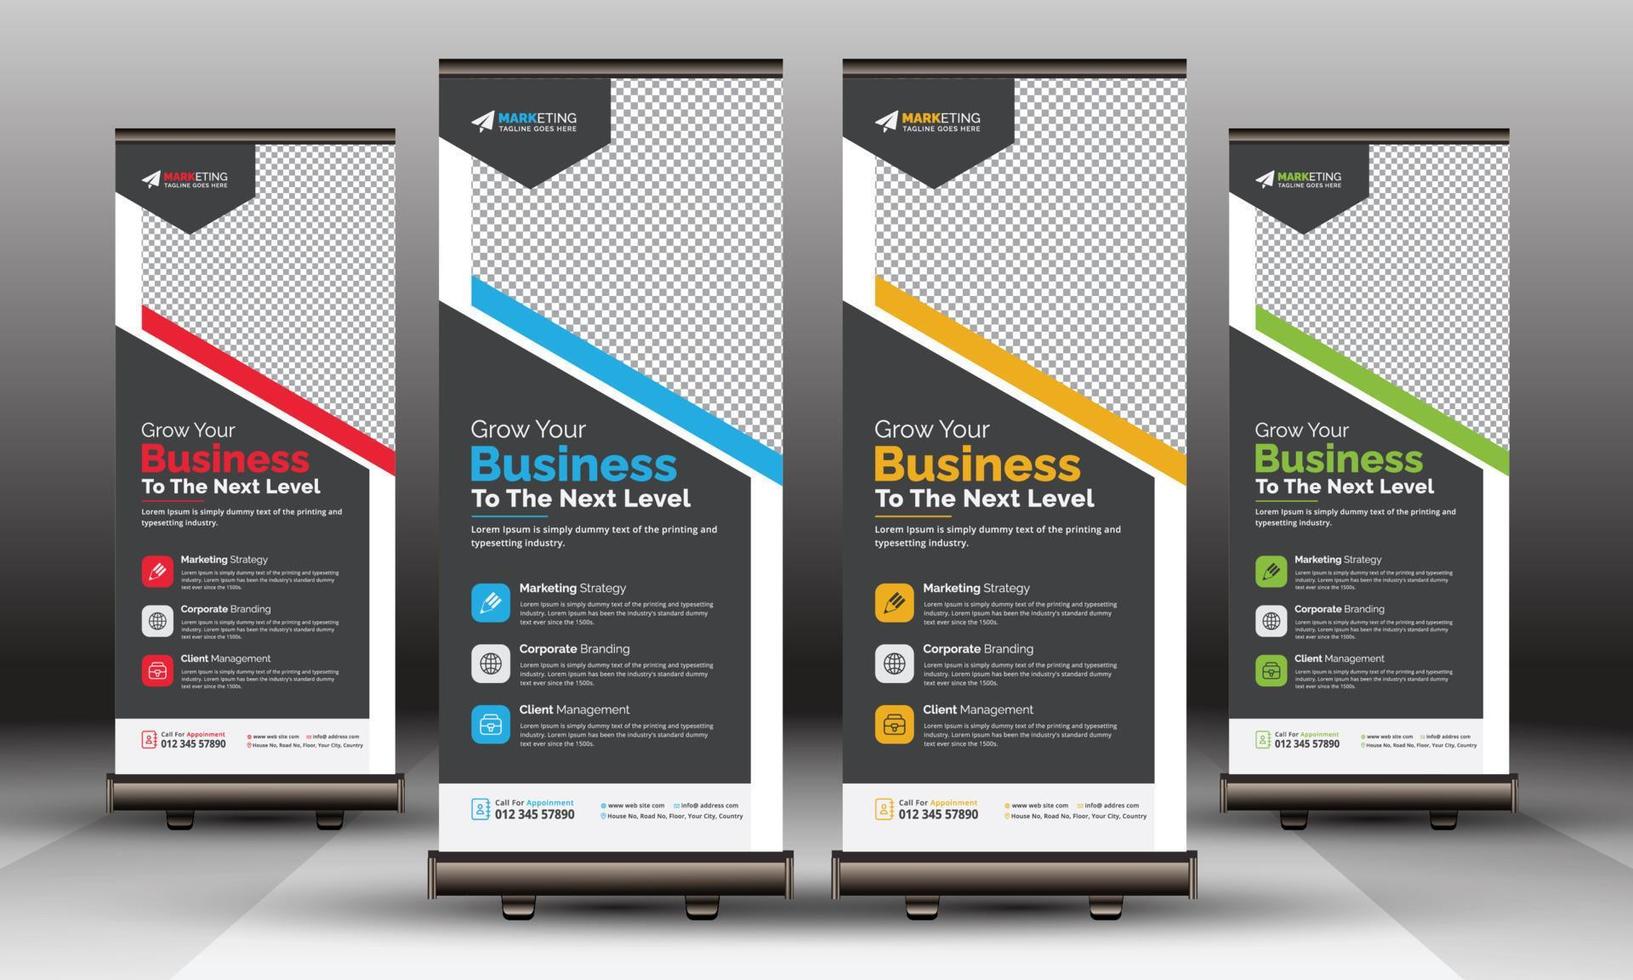 modern-corporate-business-roll-up-banner-standee-template-design-abstract-creative-x-banner-pull-up-banner-layout-for-advertisement-ads-exhibition-display-vector